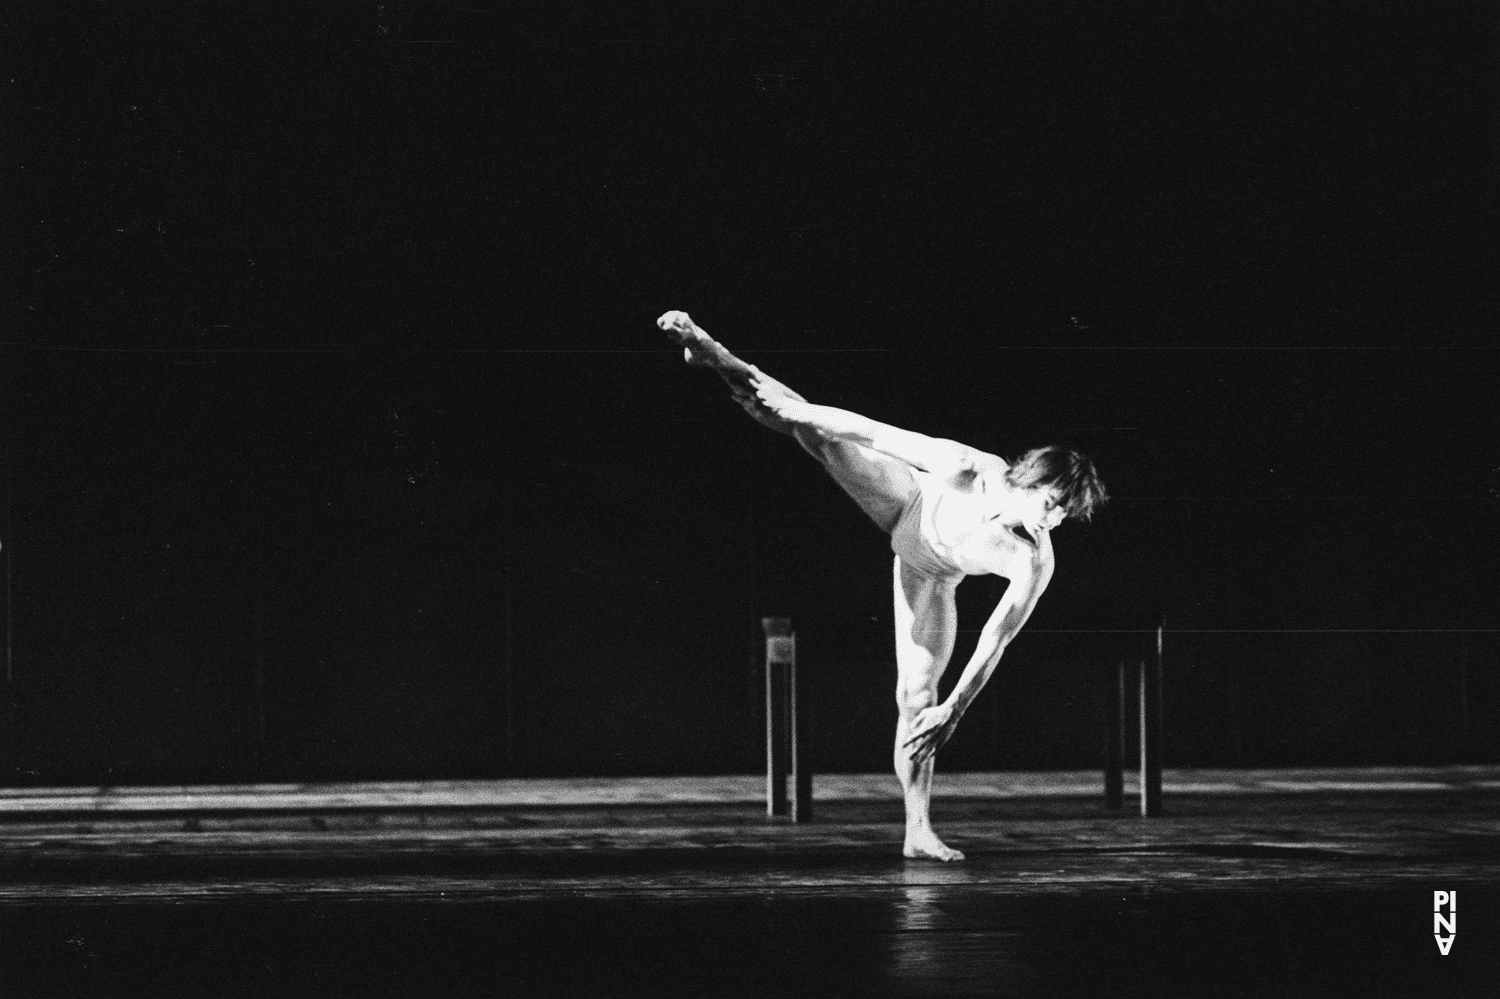 Ed Kortlandt in “Iphigenie auf Tauris” by Pina Bausch with Tanztheater Wuppertal at Opernhaus Wuppertal (Germany), April 20, 1974